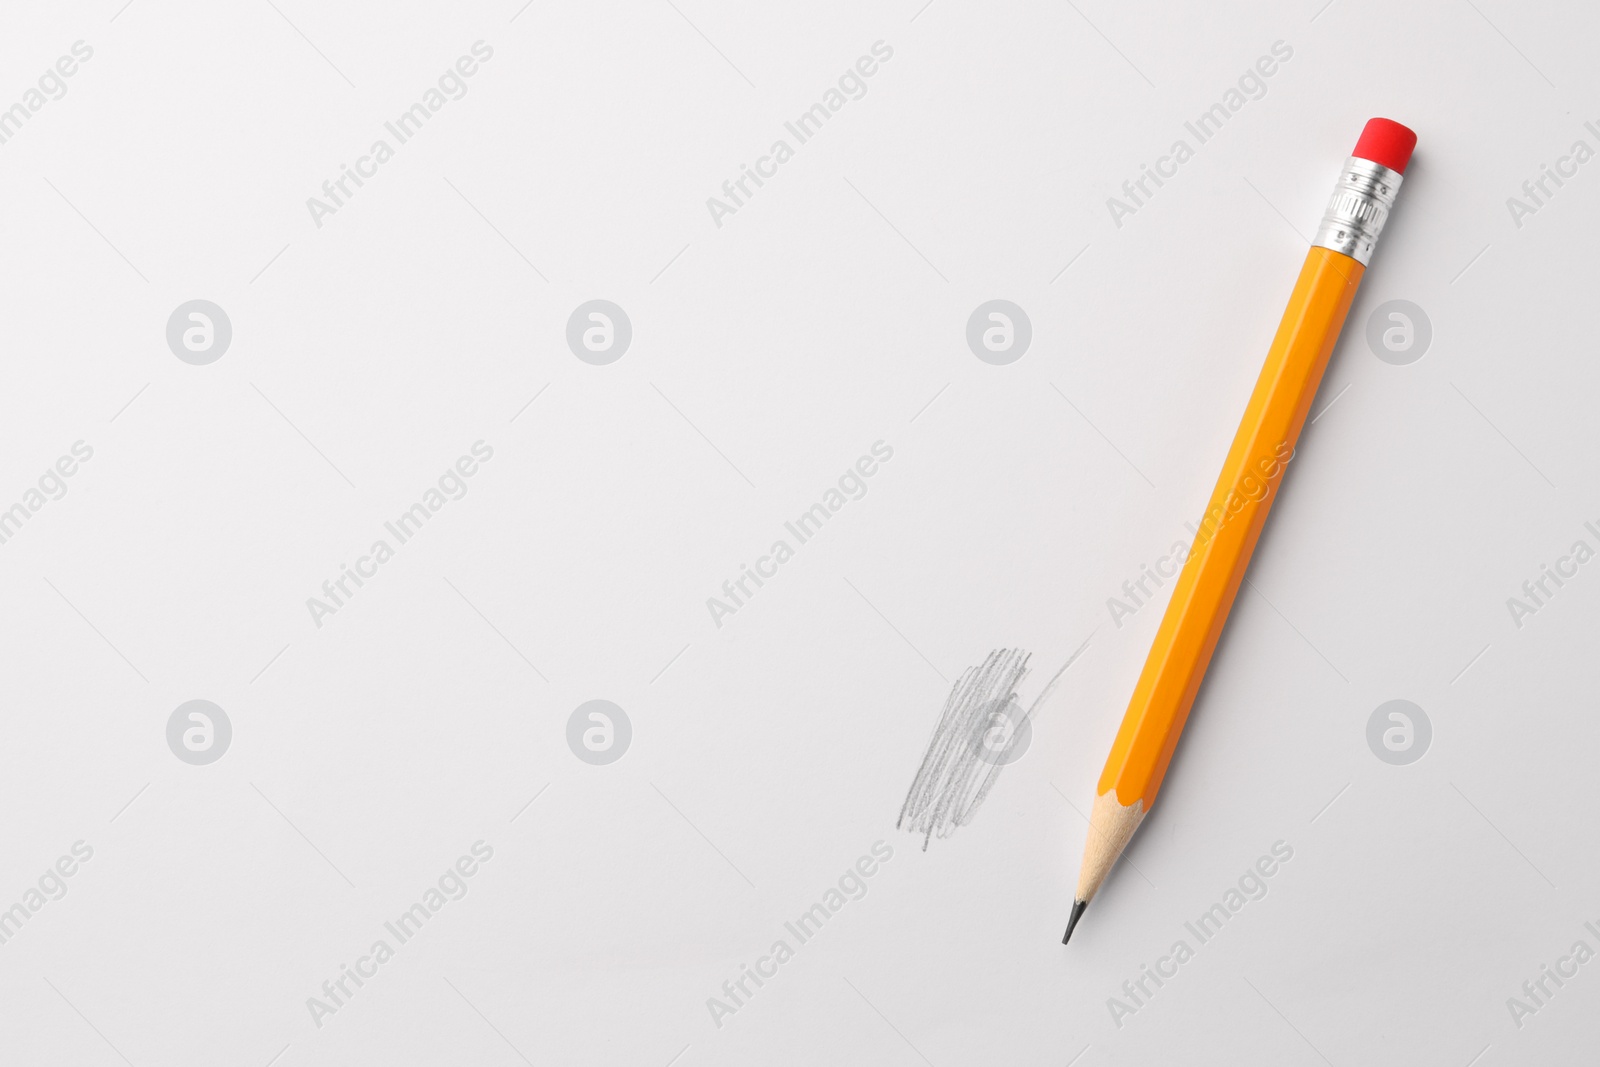 Photo of Sharp graphite pencil with eraser and hand drawn scribble on white sheet of paper, top view. Space for text